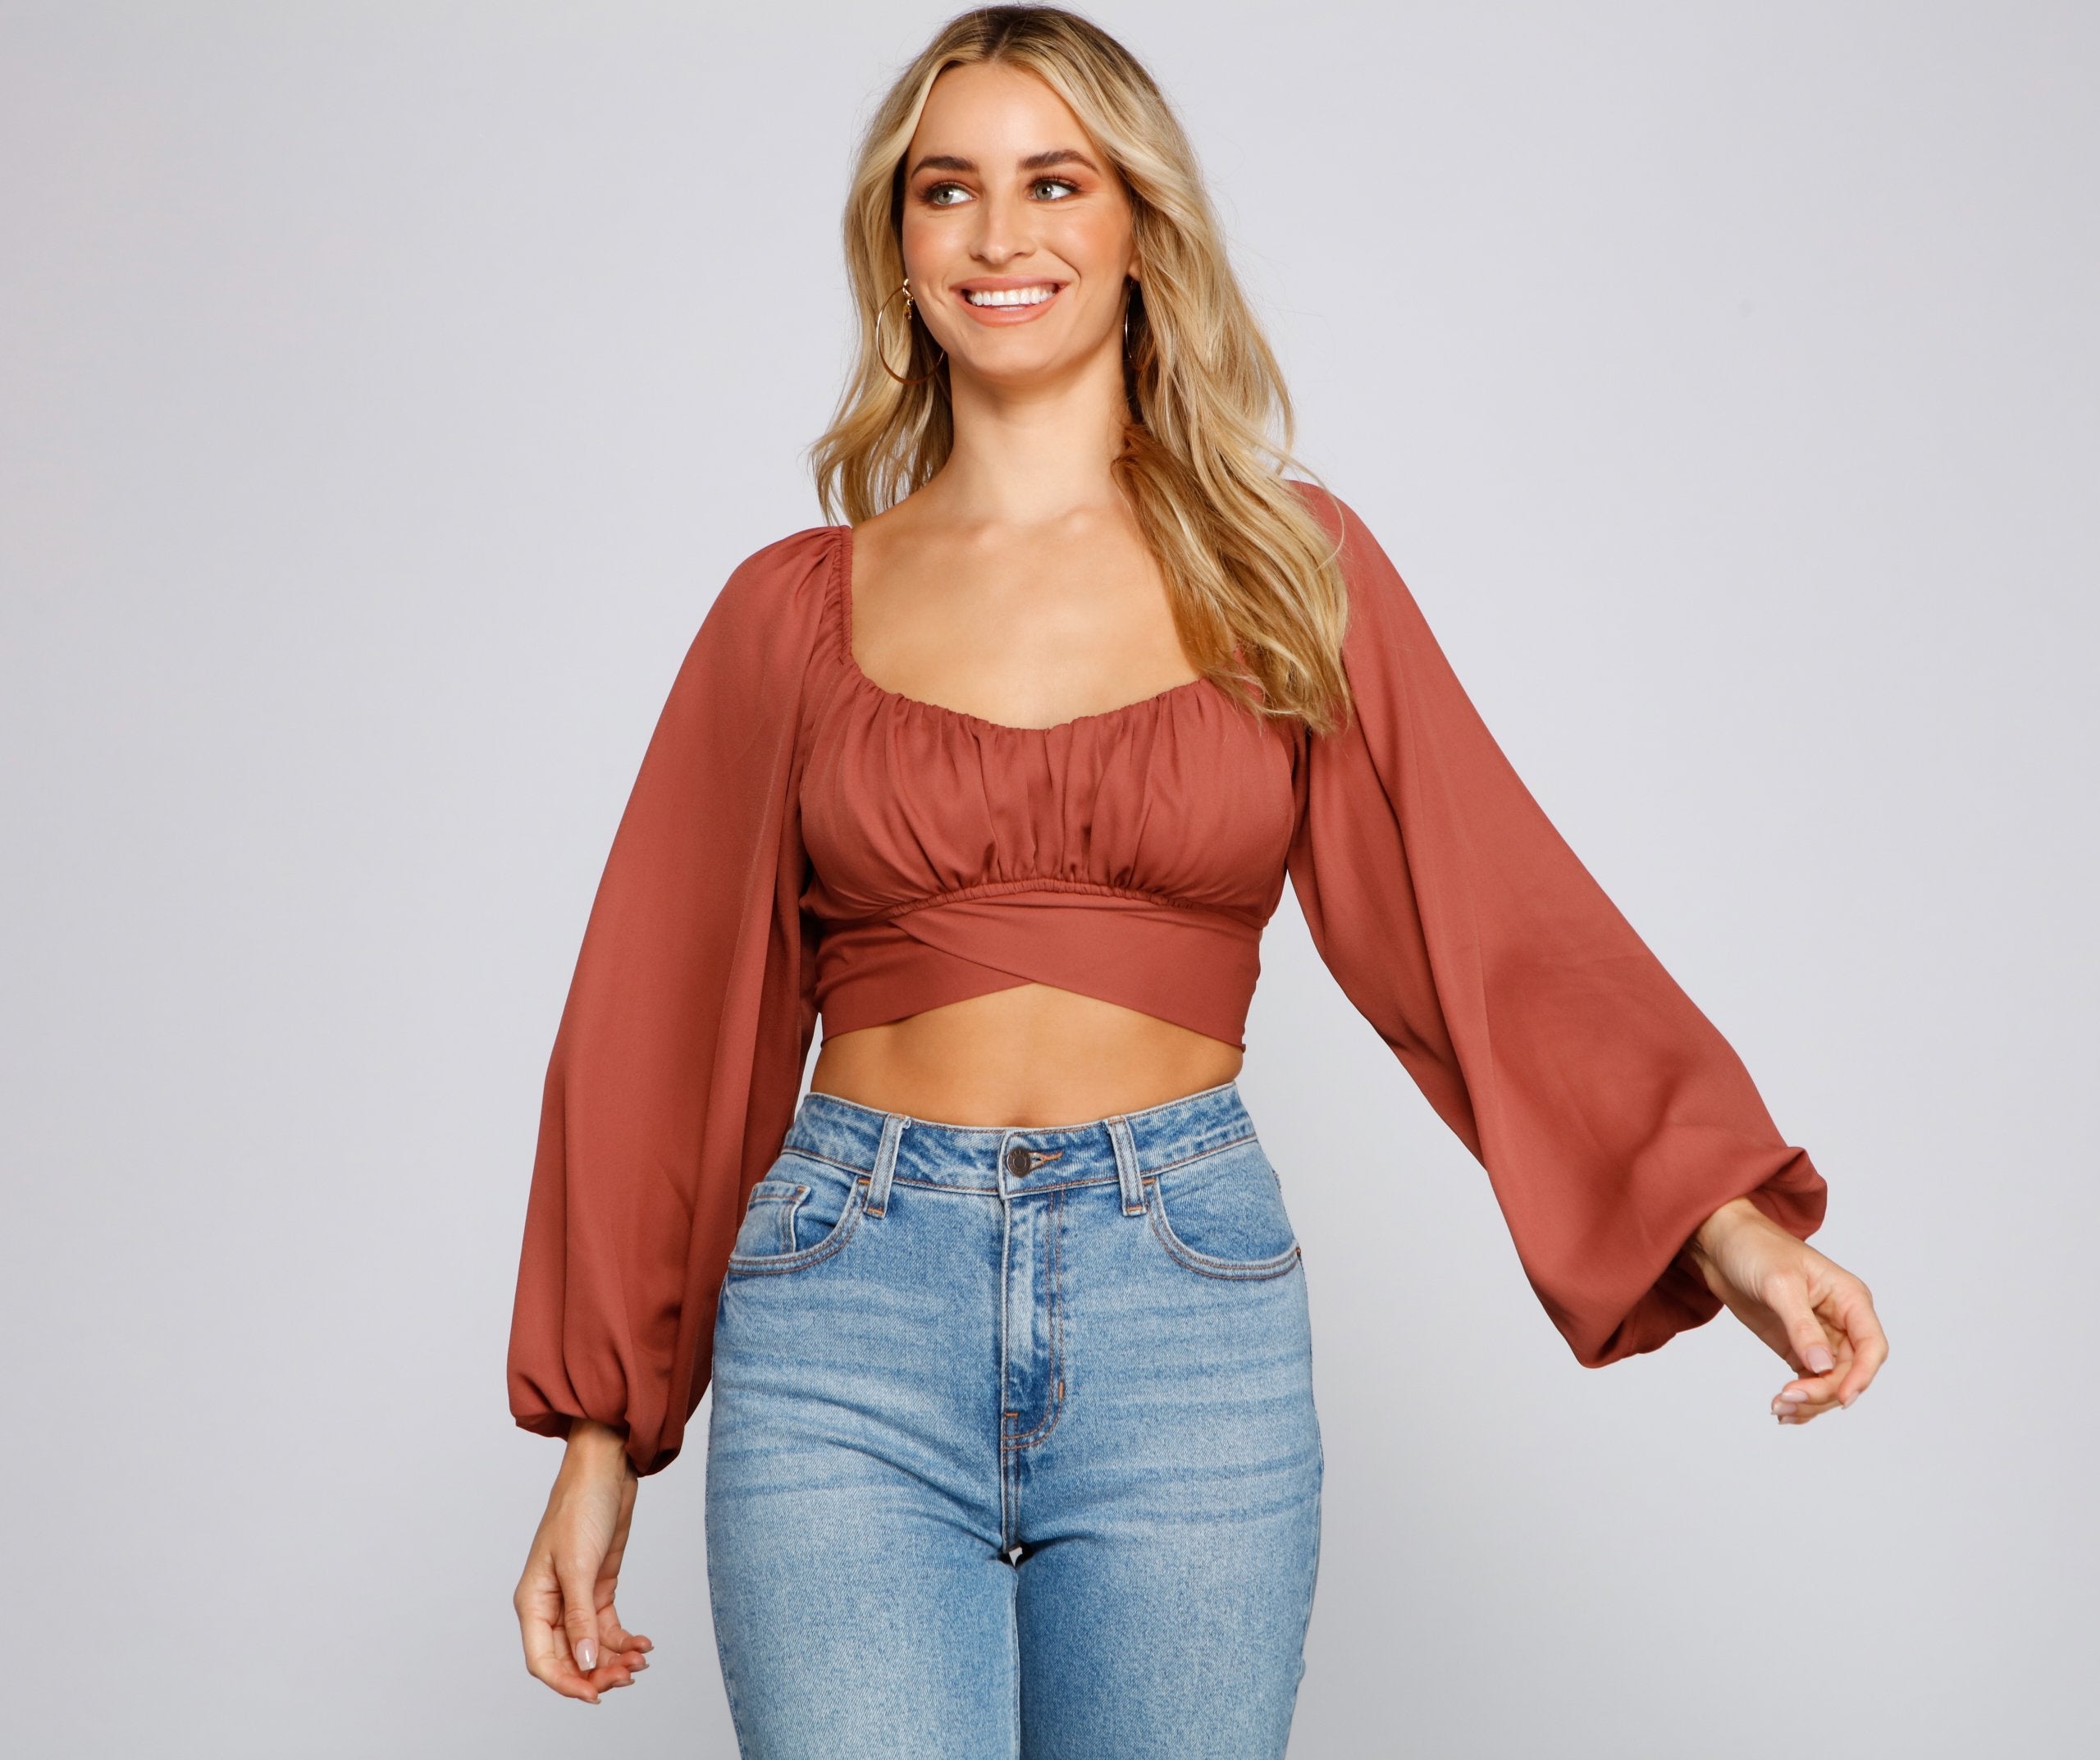 Cinched And Chic Chiffon Crop Top - Lady Occasions